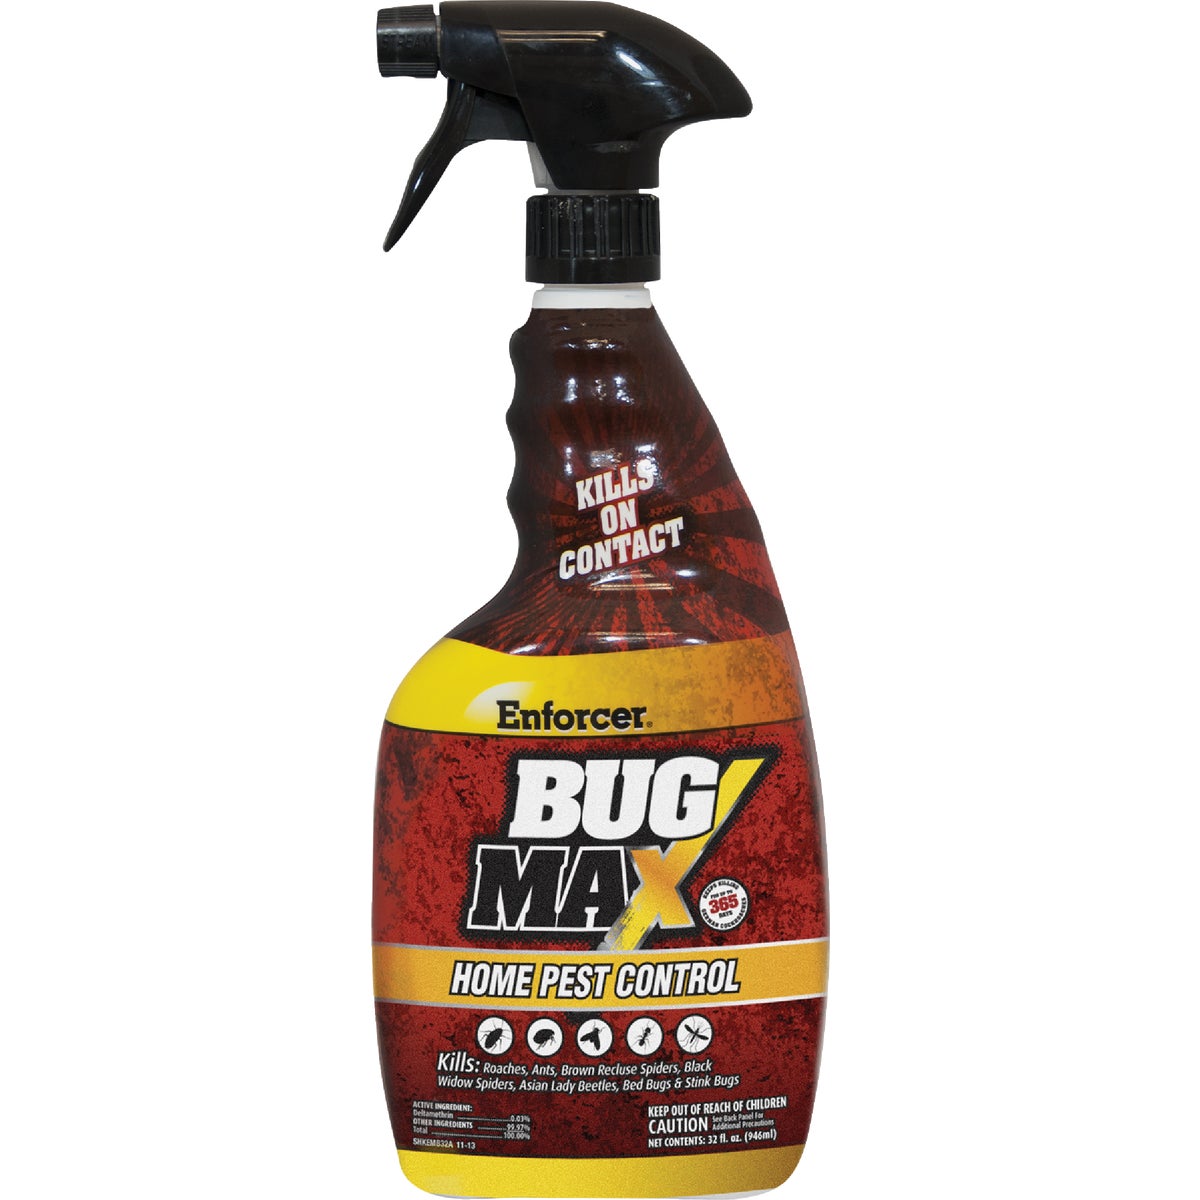 Enforcer BugMax Home Pest Control 32 Oz. Ready To Use Trigger Spray Insect Killer